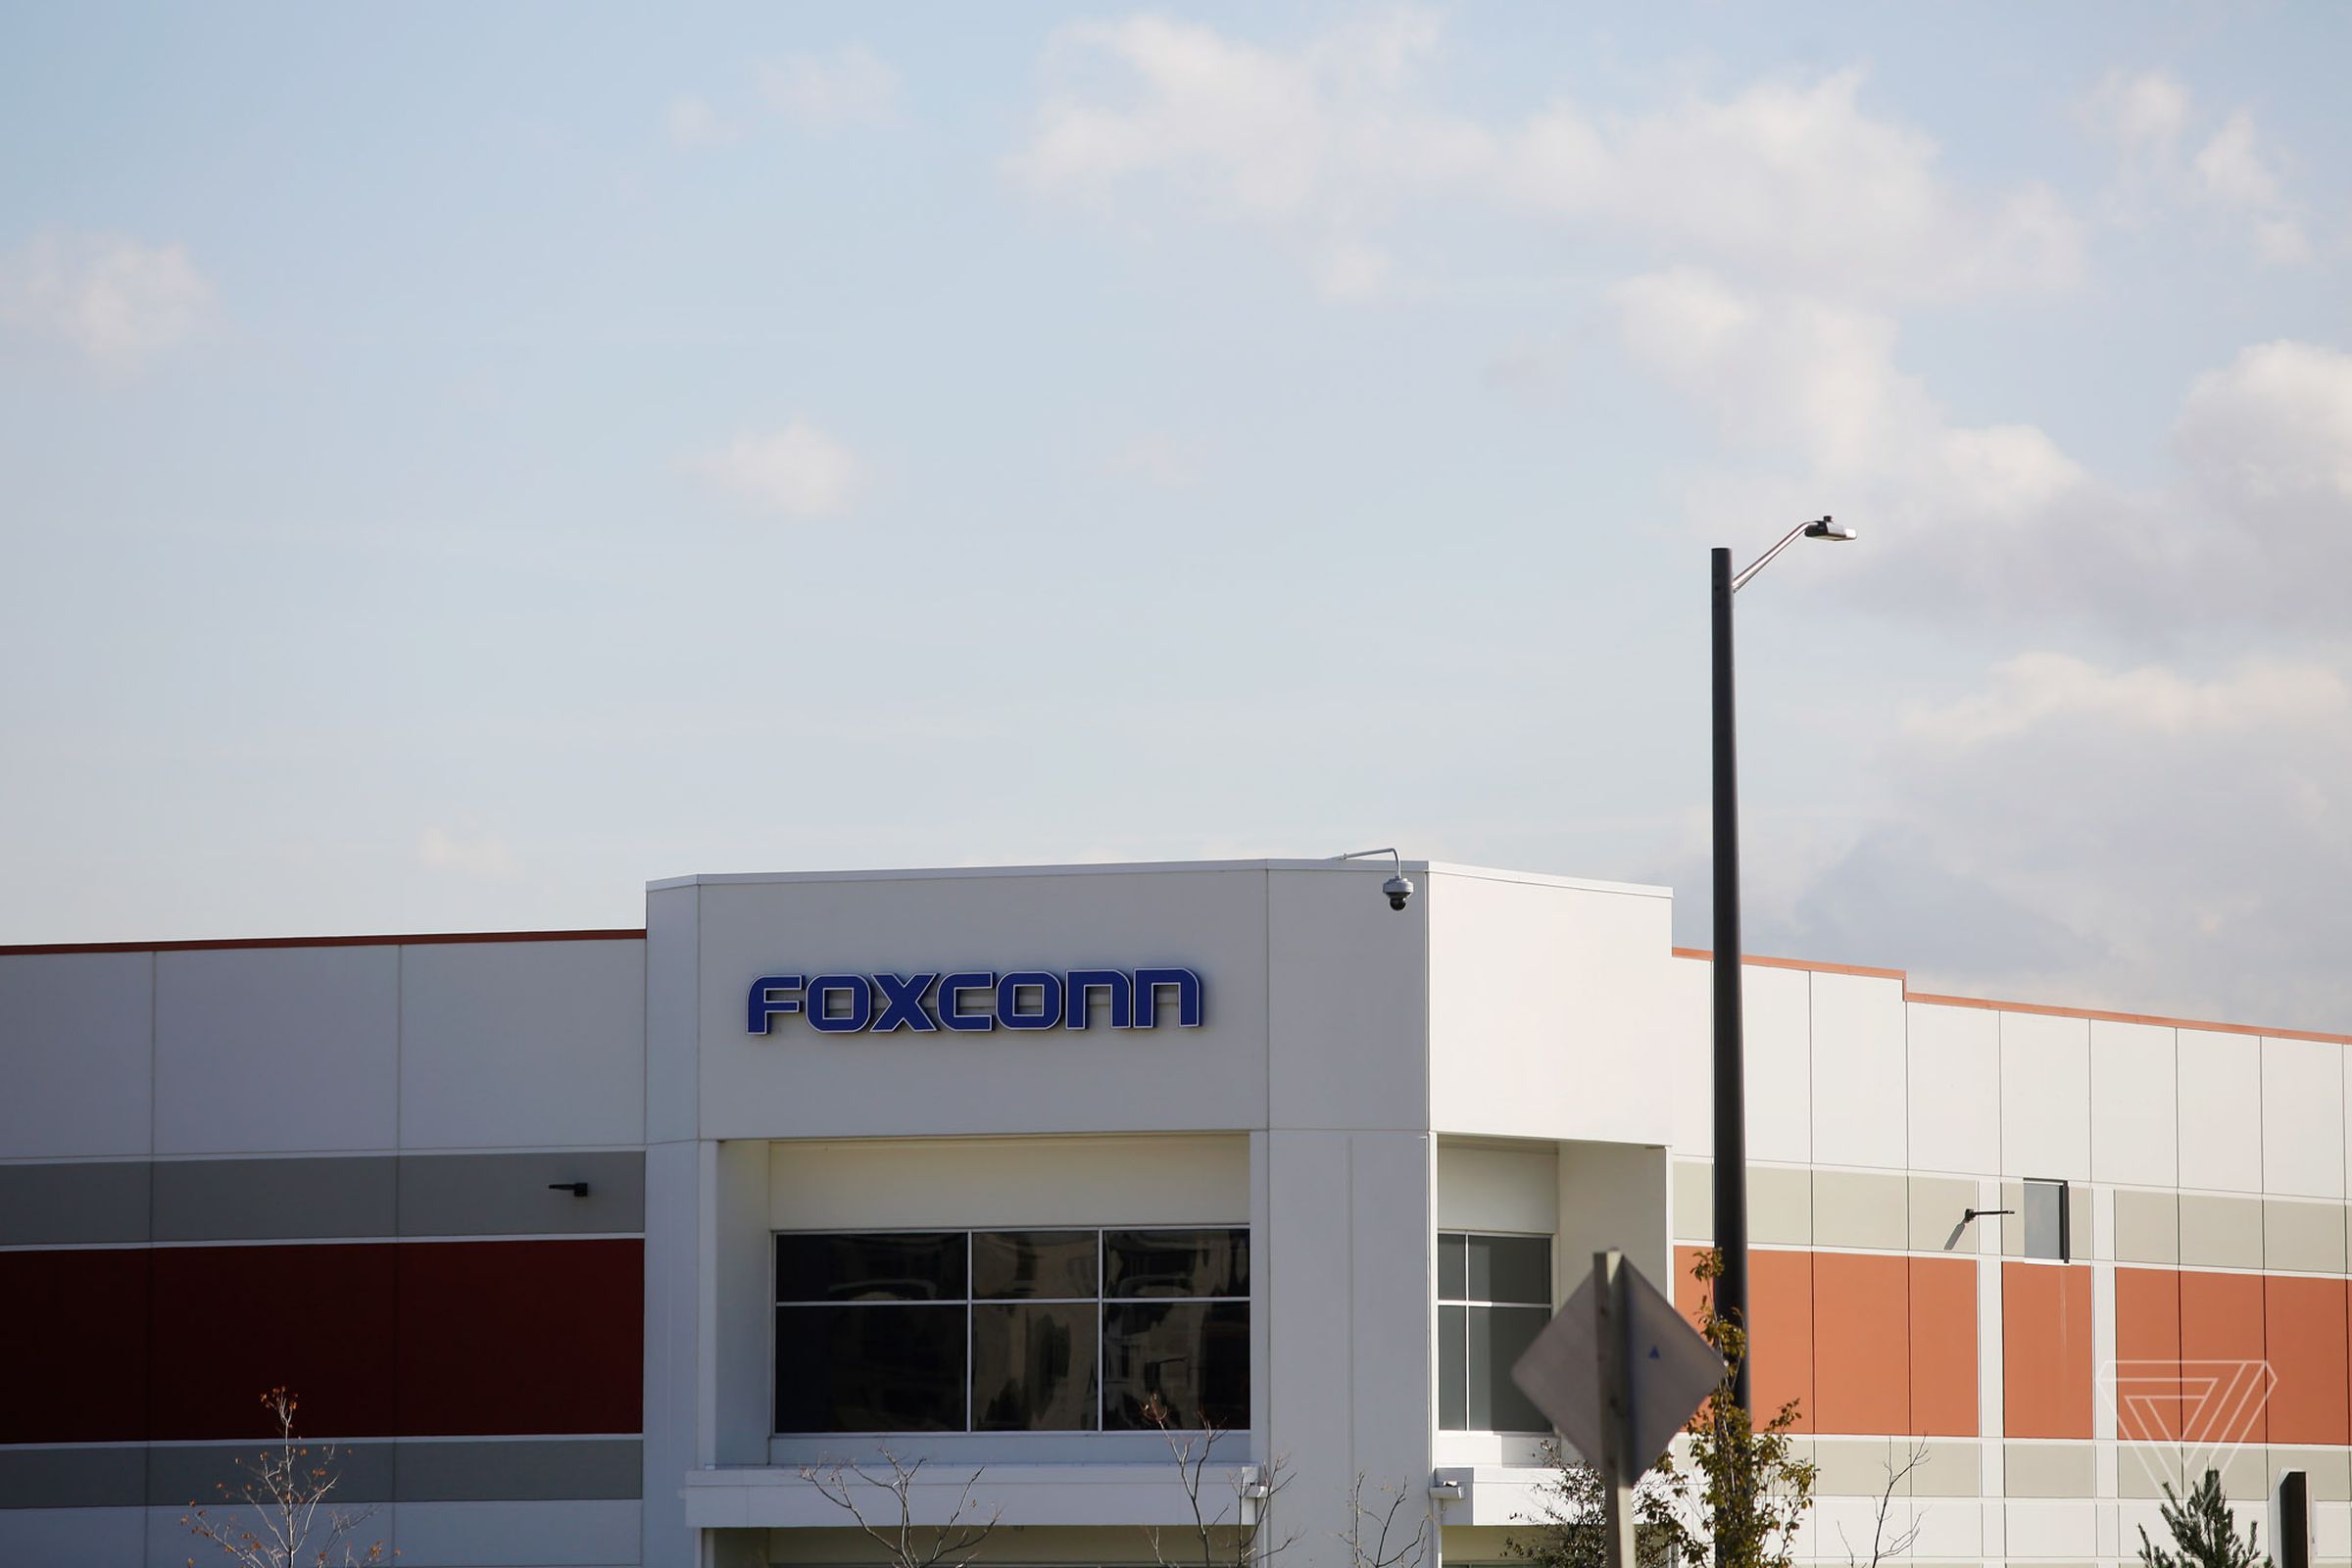 The Foxconn Innovation Center near the Foxconn manufacturing construction site in Mt. Pleasant, Wisconsin.